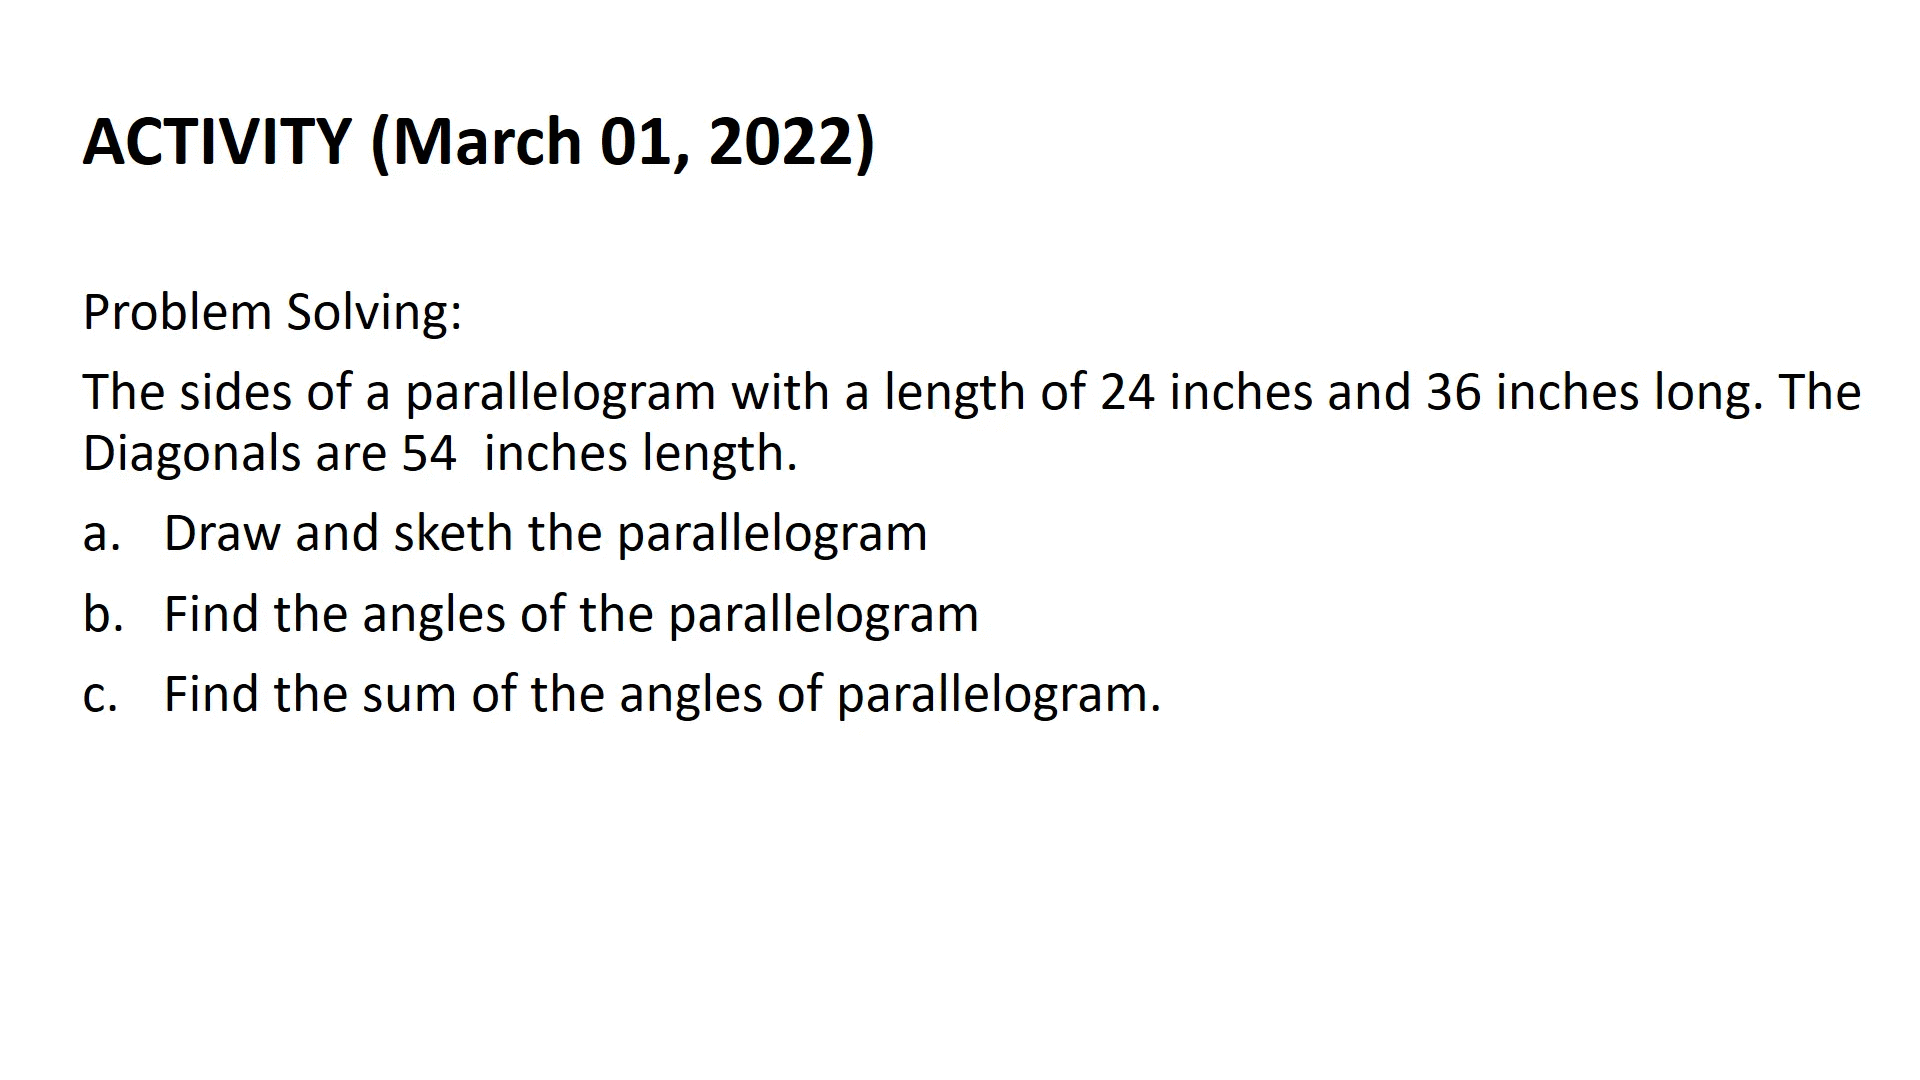 ACTIVITY (March 01, 2022)
Problem Solving:
The sides of a parallelogram with a length of 24 inches and 36 inches long. The
Diagonals are 54 inches length.
a. Draw and sketh the parallelogram
b. Find the angles of the parallelogram
c. Find the sum of the angles of parallelogram.
С.
